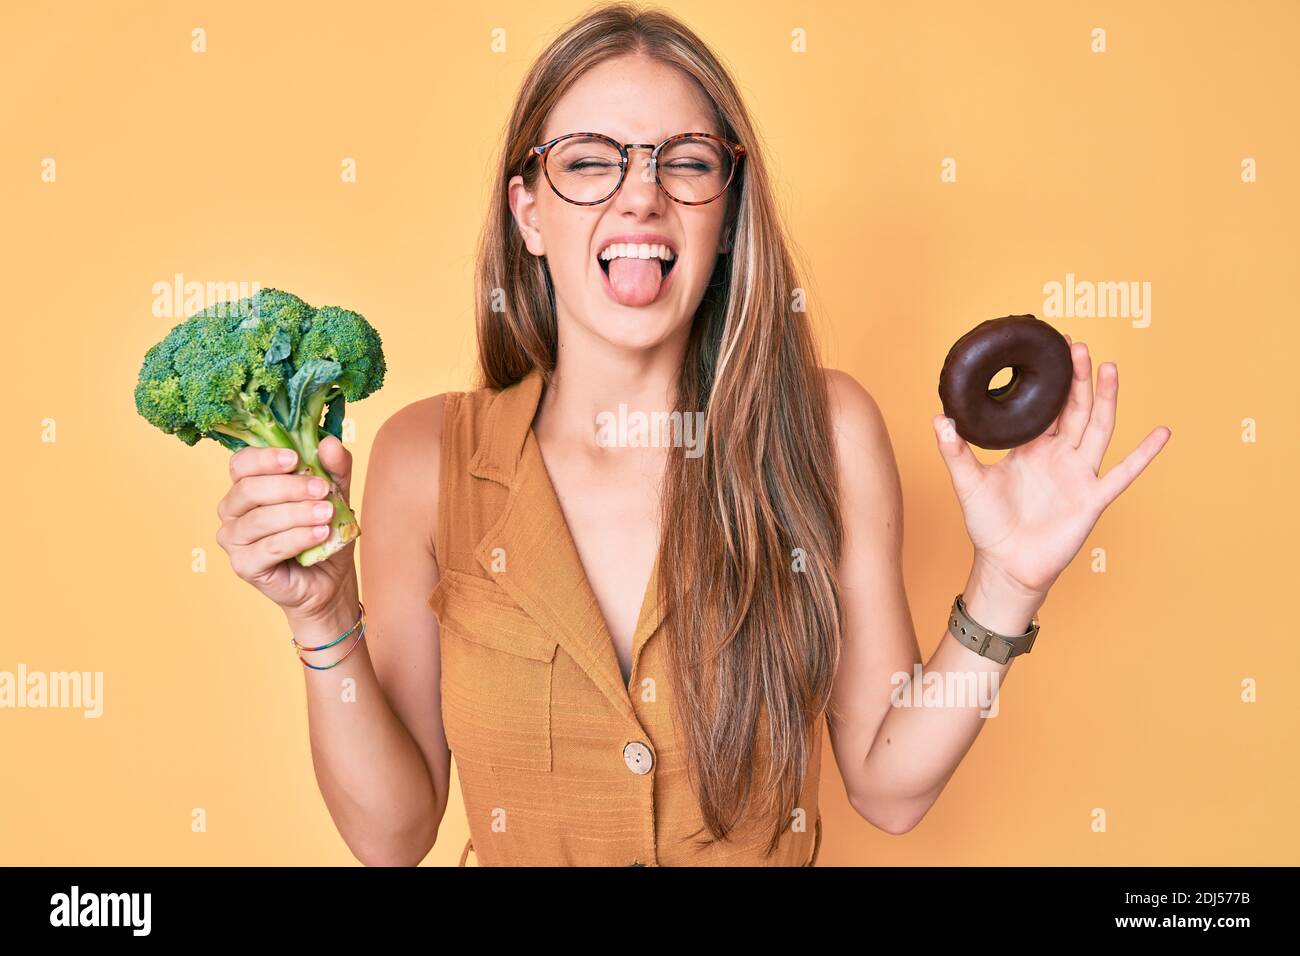 Young blonde girl holding broccoli and chocolate donut sticking tongue out happy with funny expression. Stock Photo